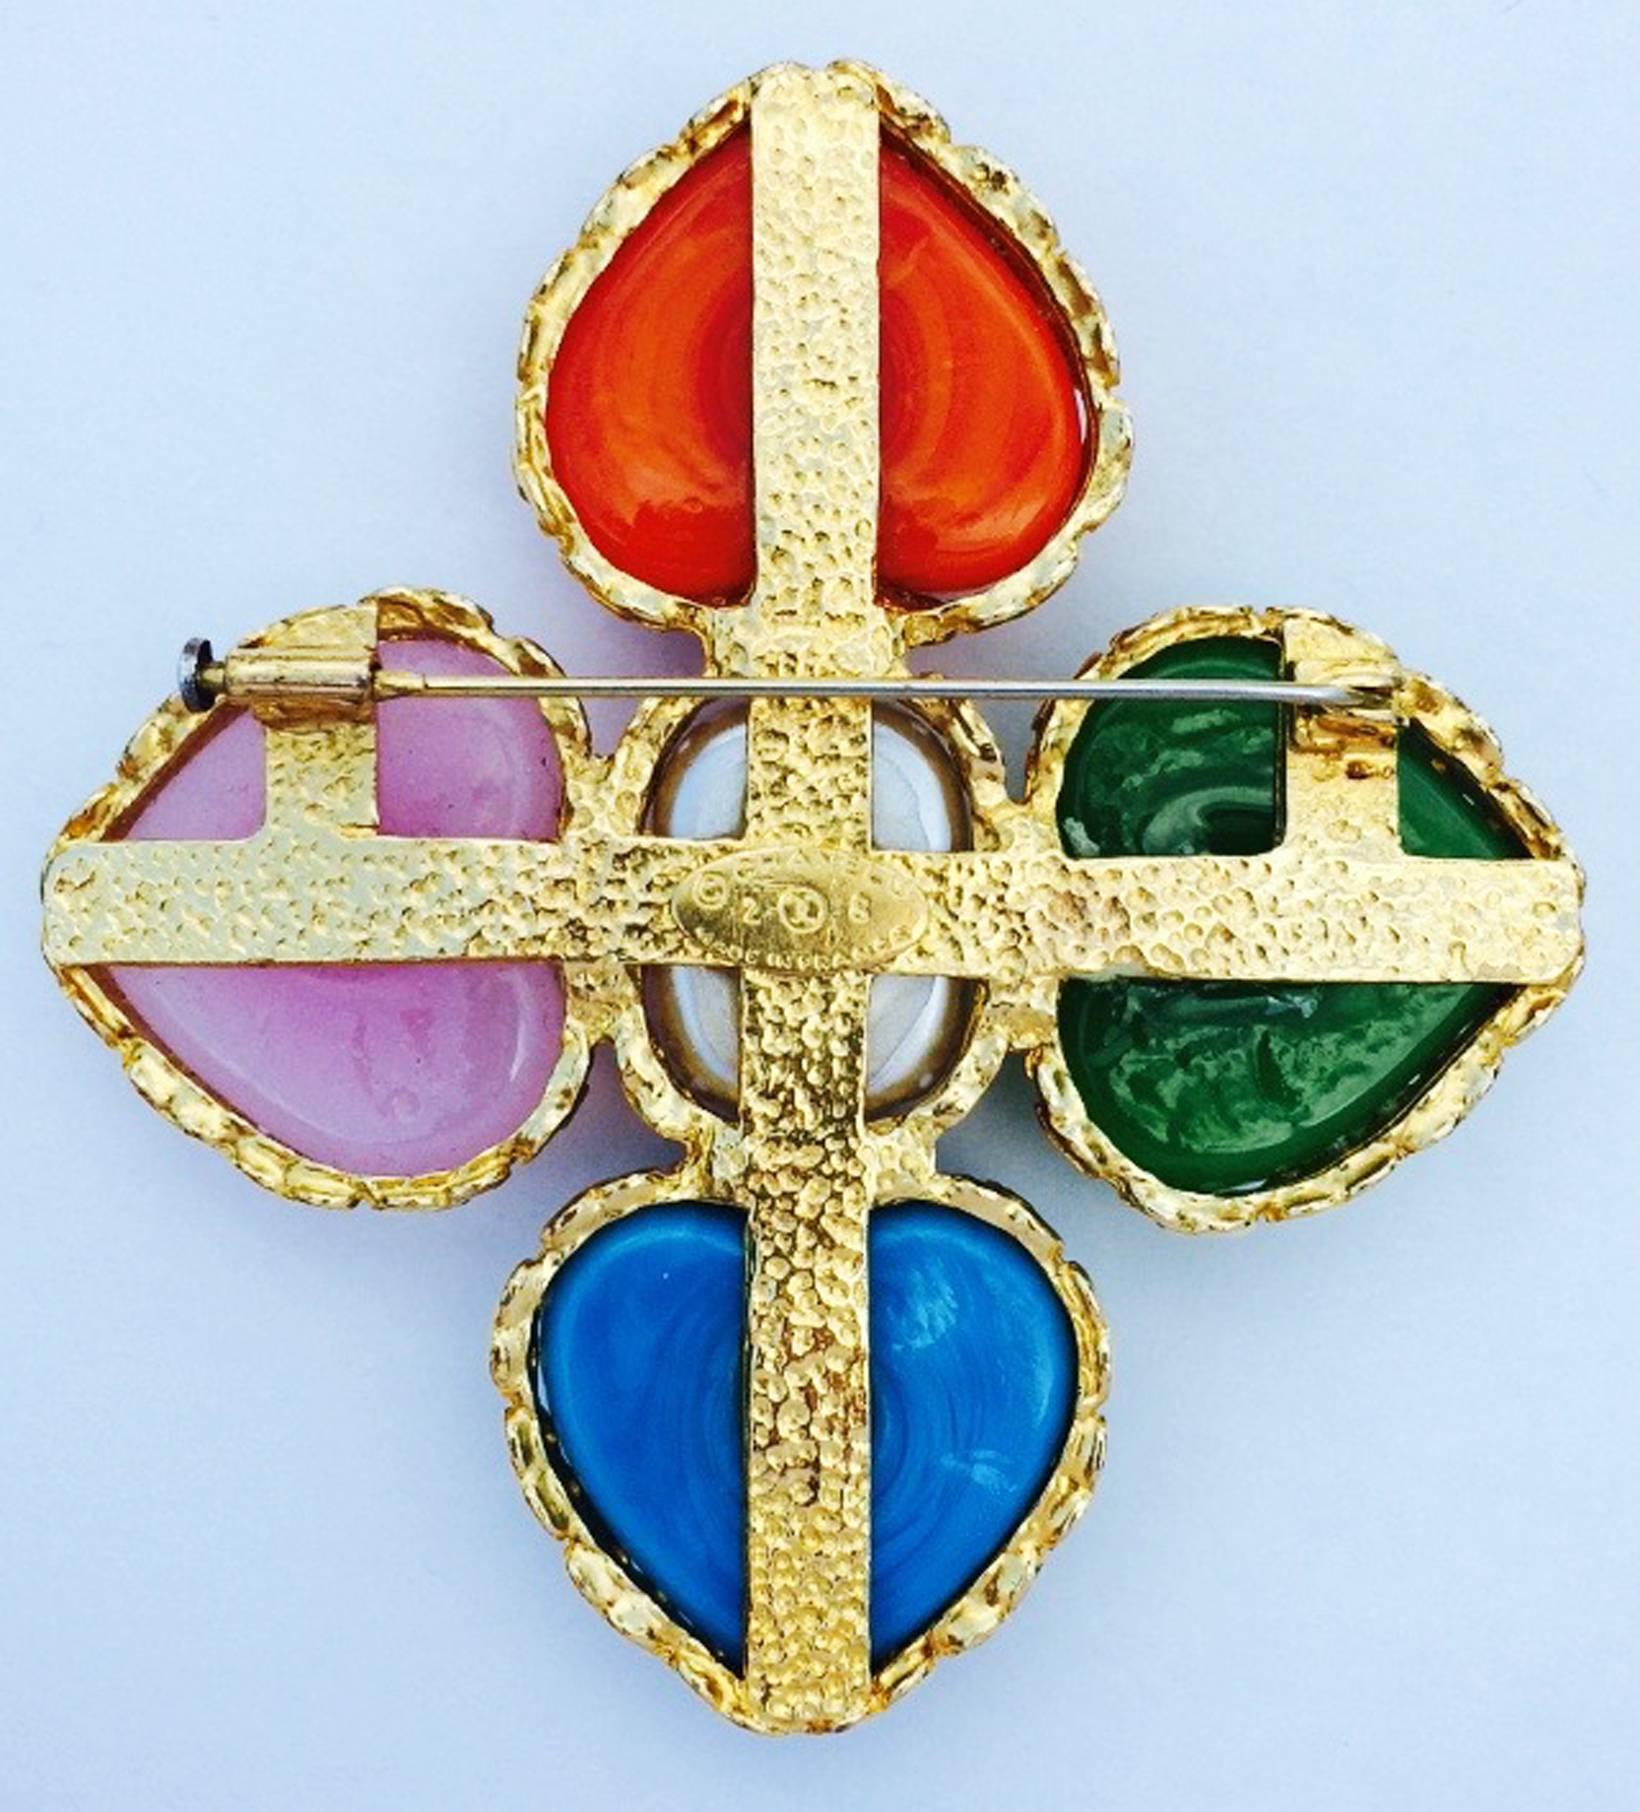 A fine and rare vintage Chanel hearts cross brooch. Signed gilt metal item features a faux pearl center and various colored Maison Gripoix poured glass 